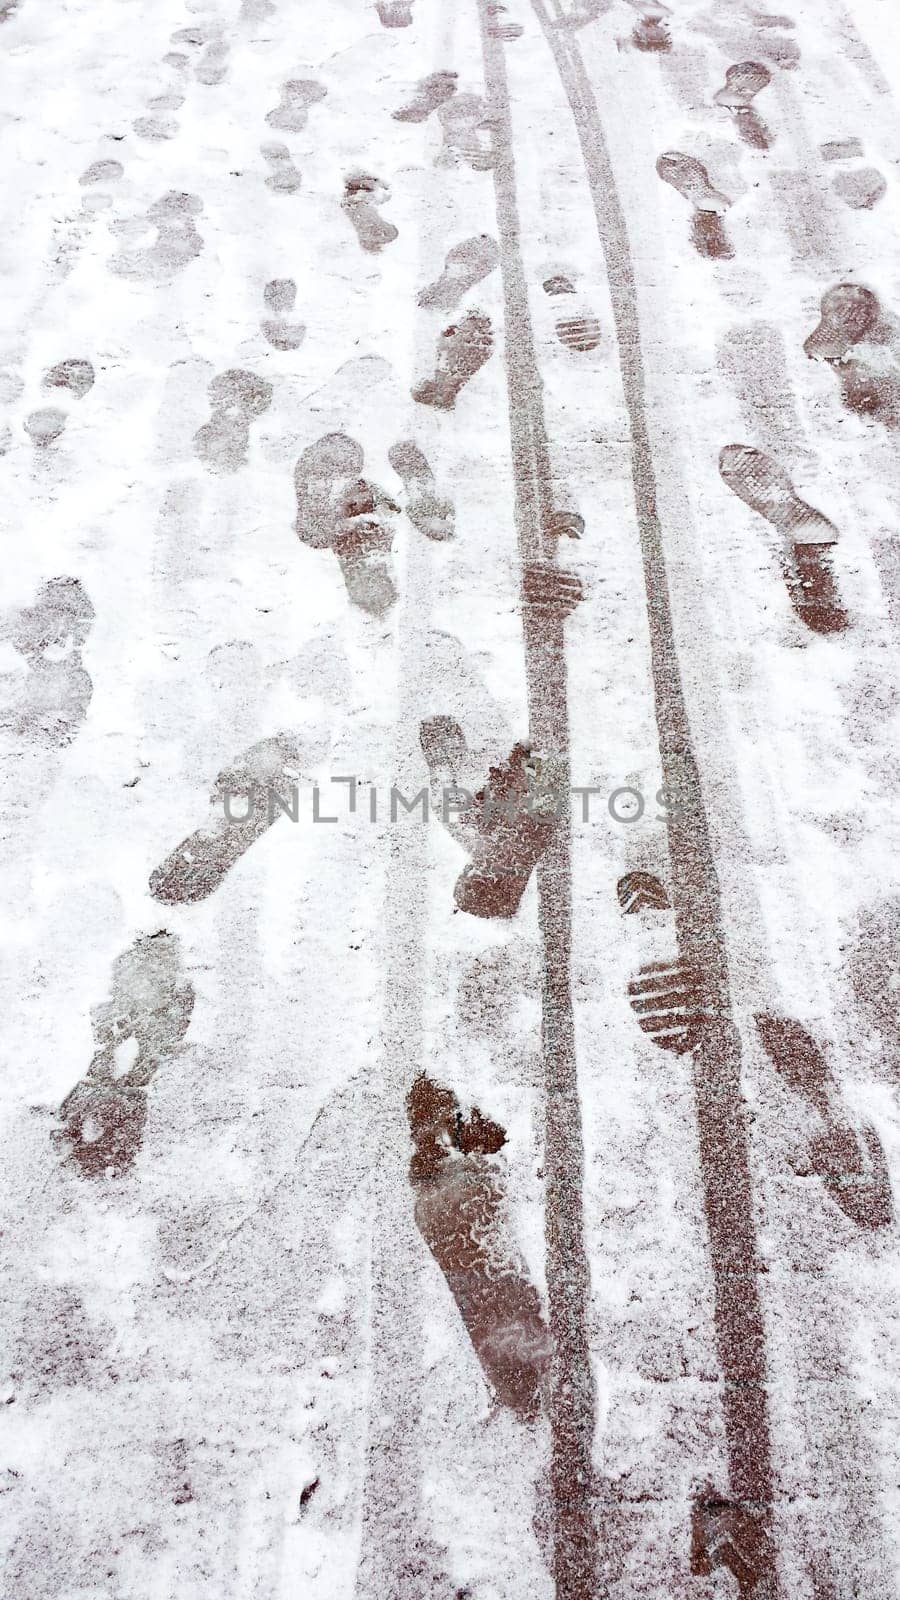 Footprints in the snow on red tarmac by jameshumble